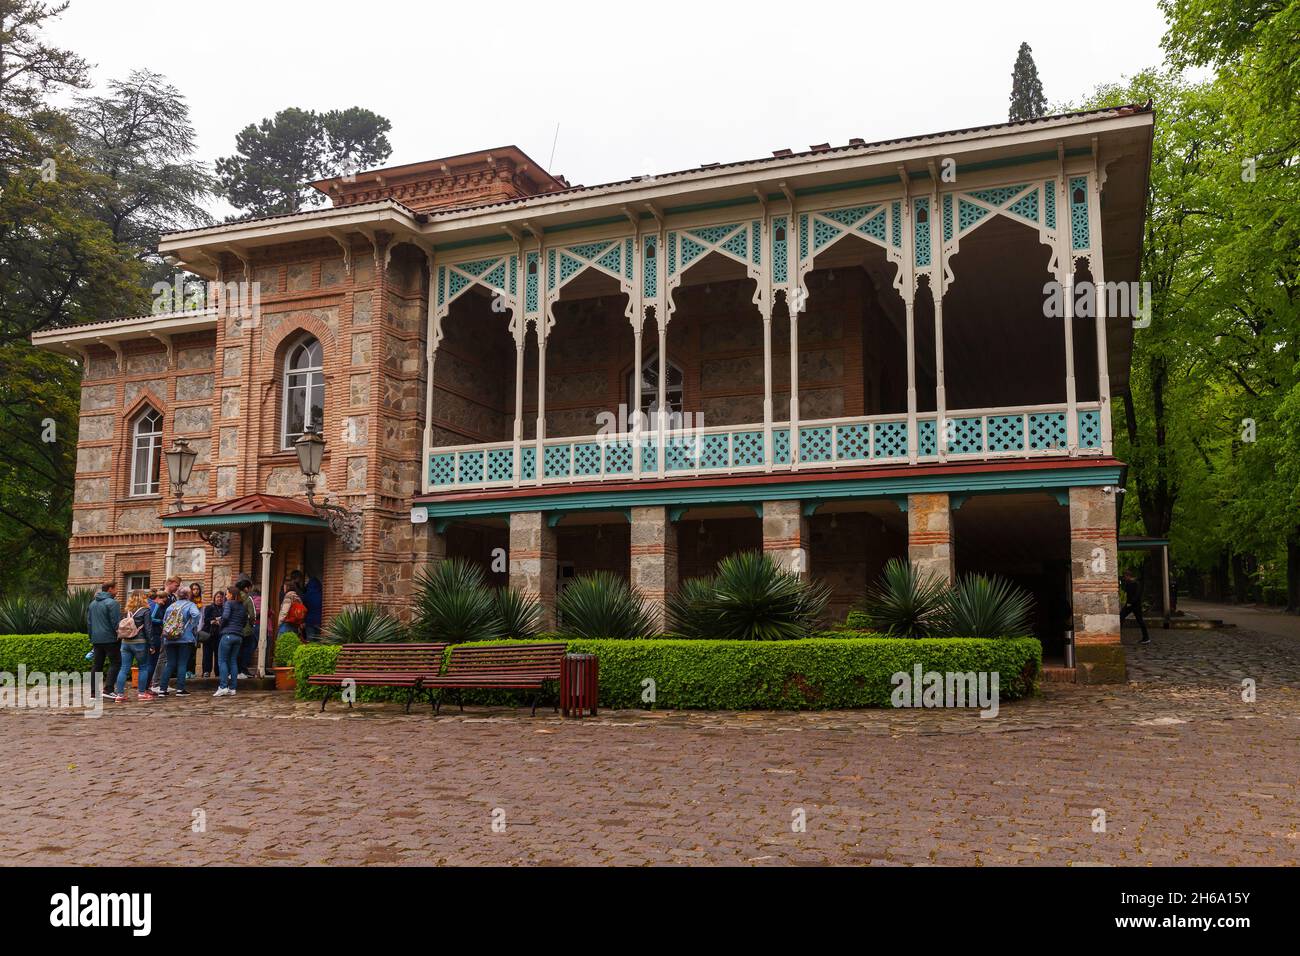 Tsinandali, Georgia - May 4, 2019: Tourists are at the entrance of the Tsinandali residence located a village in Kakheti, Georgia, situated in the dis Stock Photo